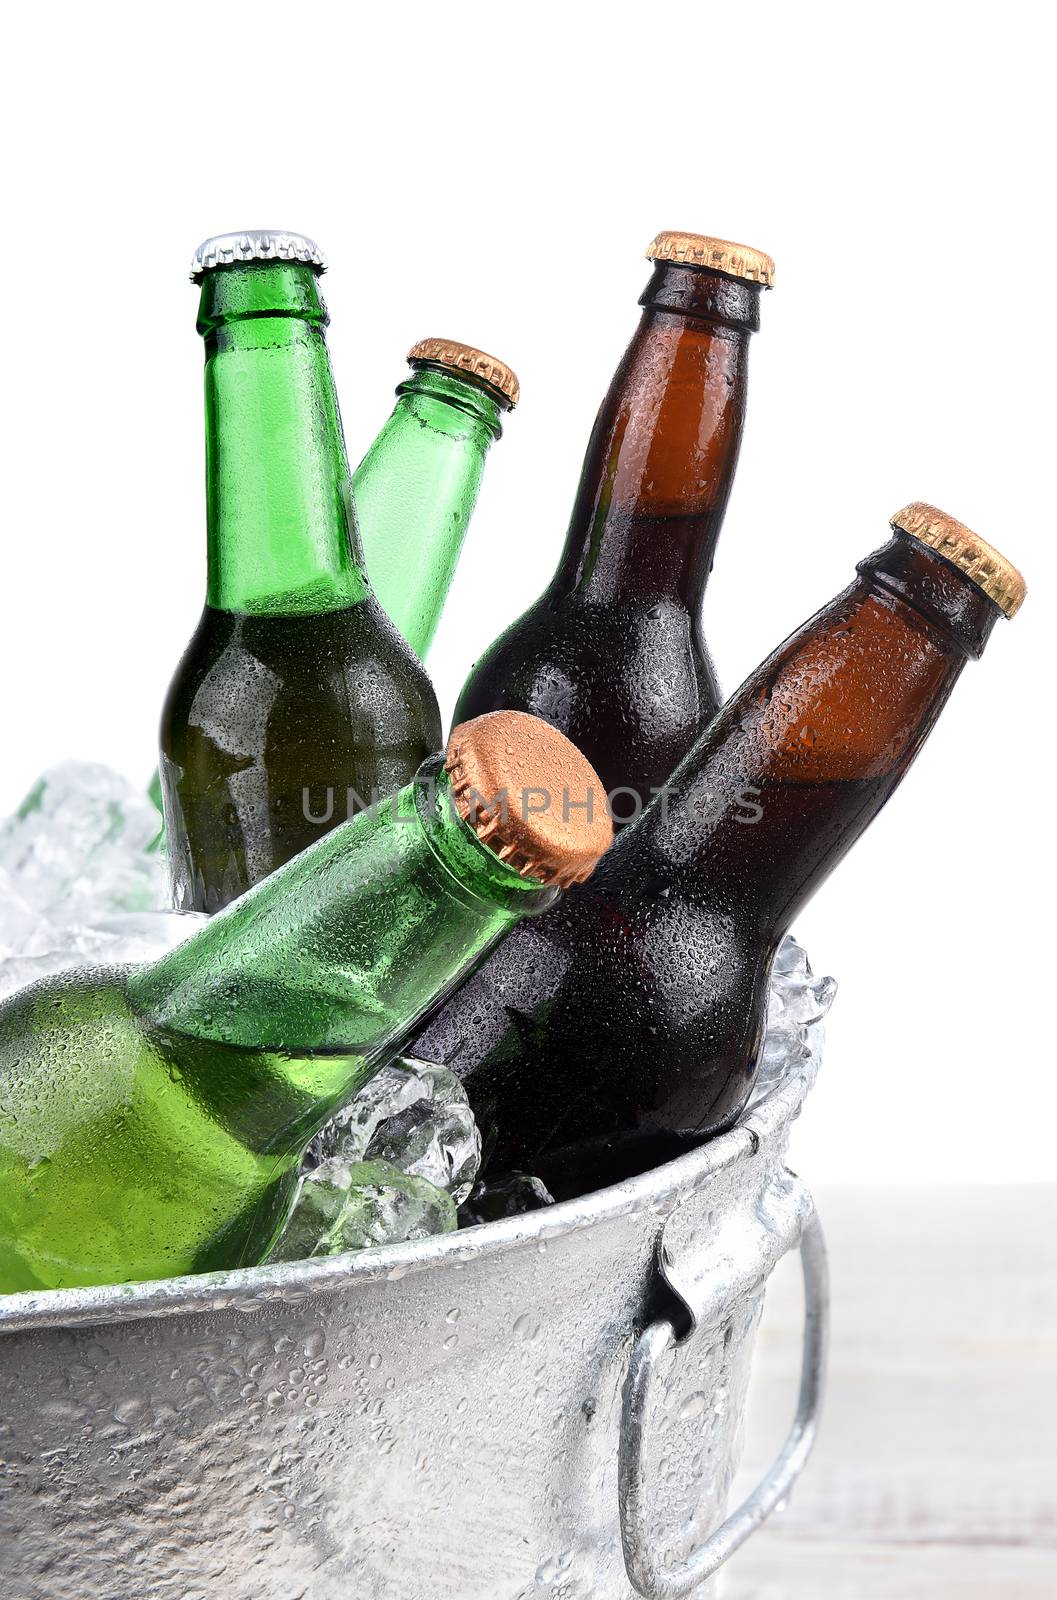 Beer Bottles in Ice Buclet Closeup by sCukrov